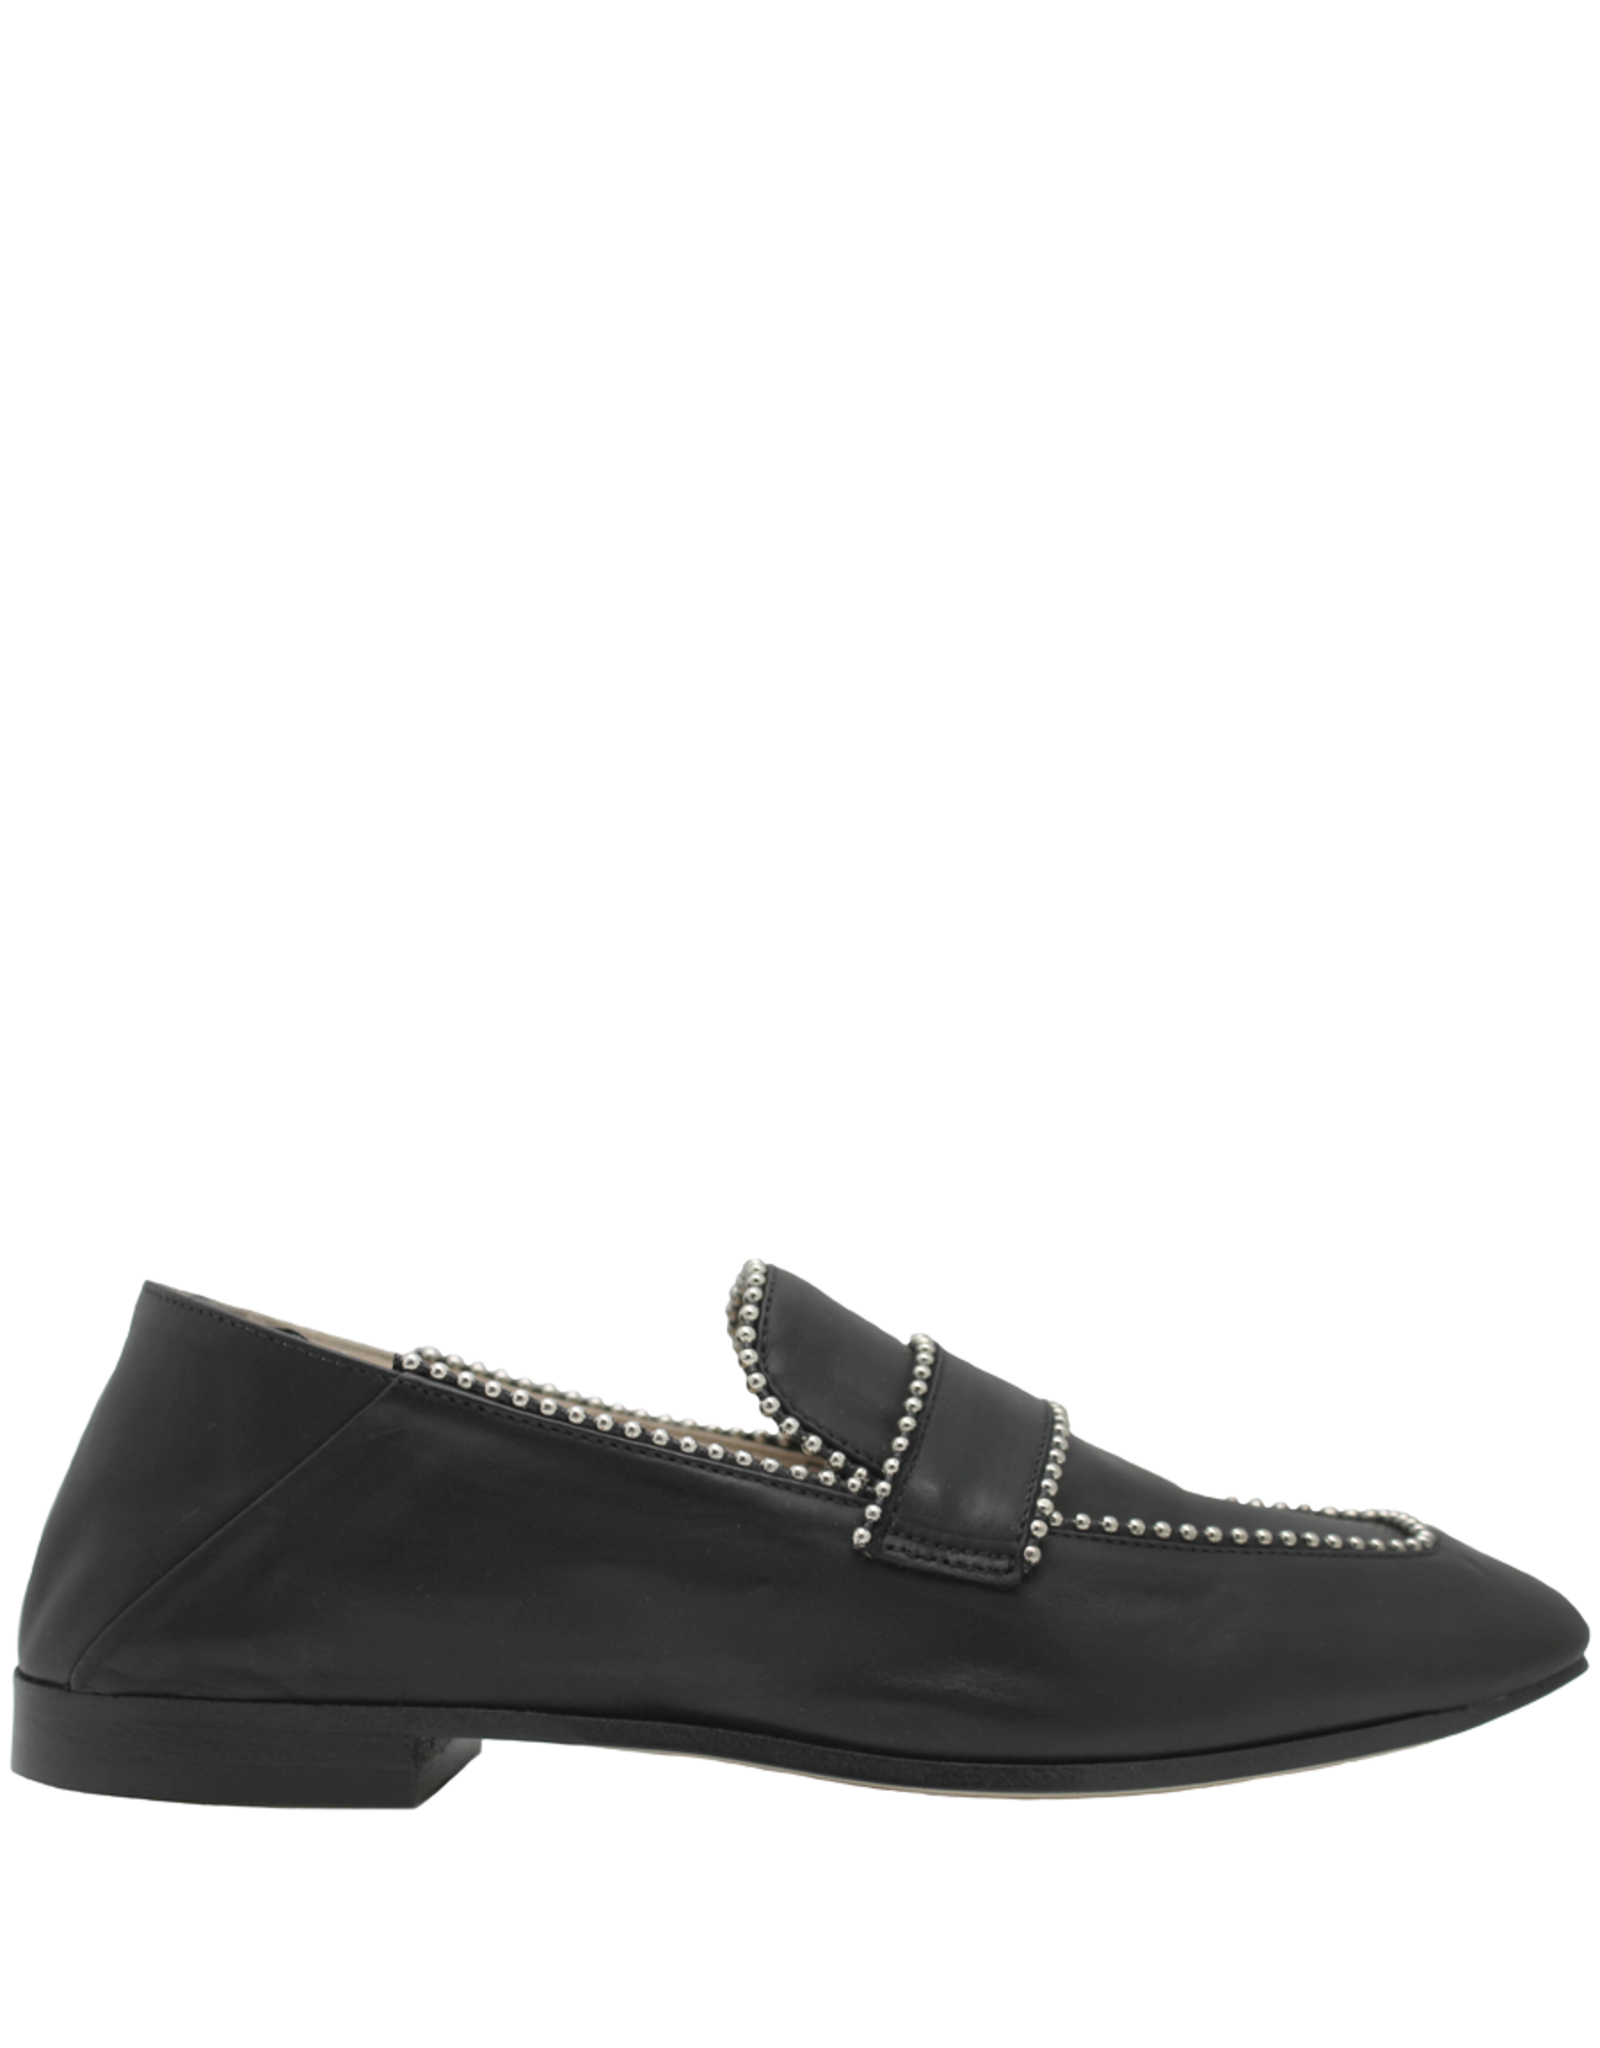 Now Now Black Loafer With Studs-6947